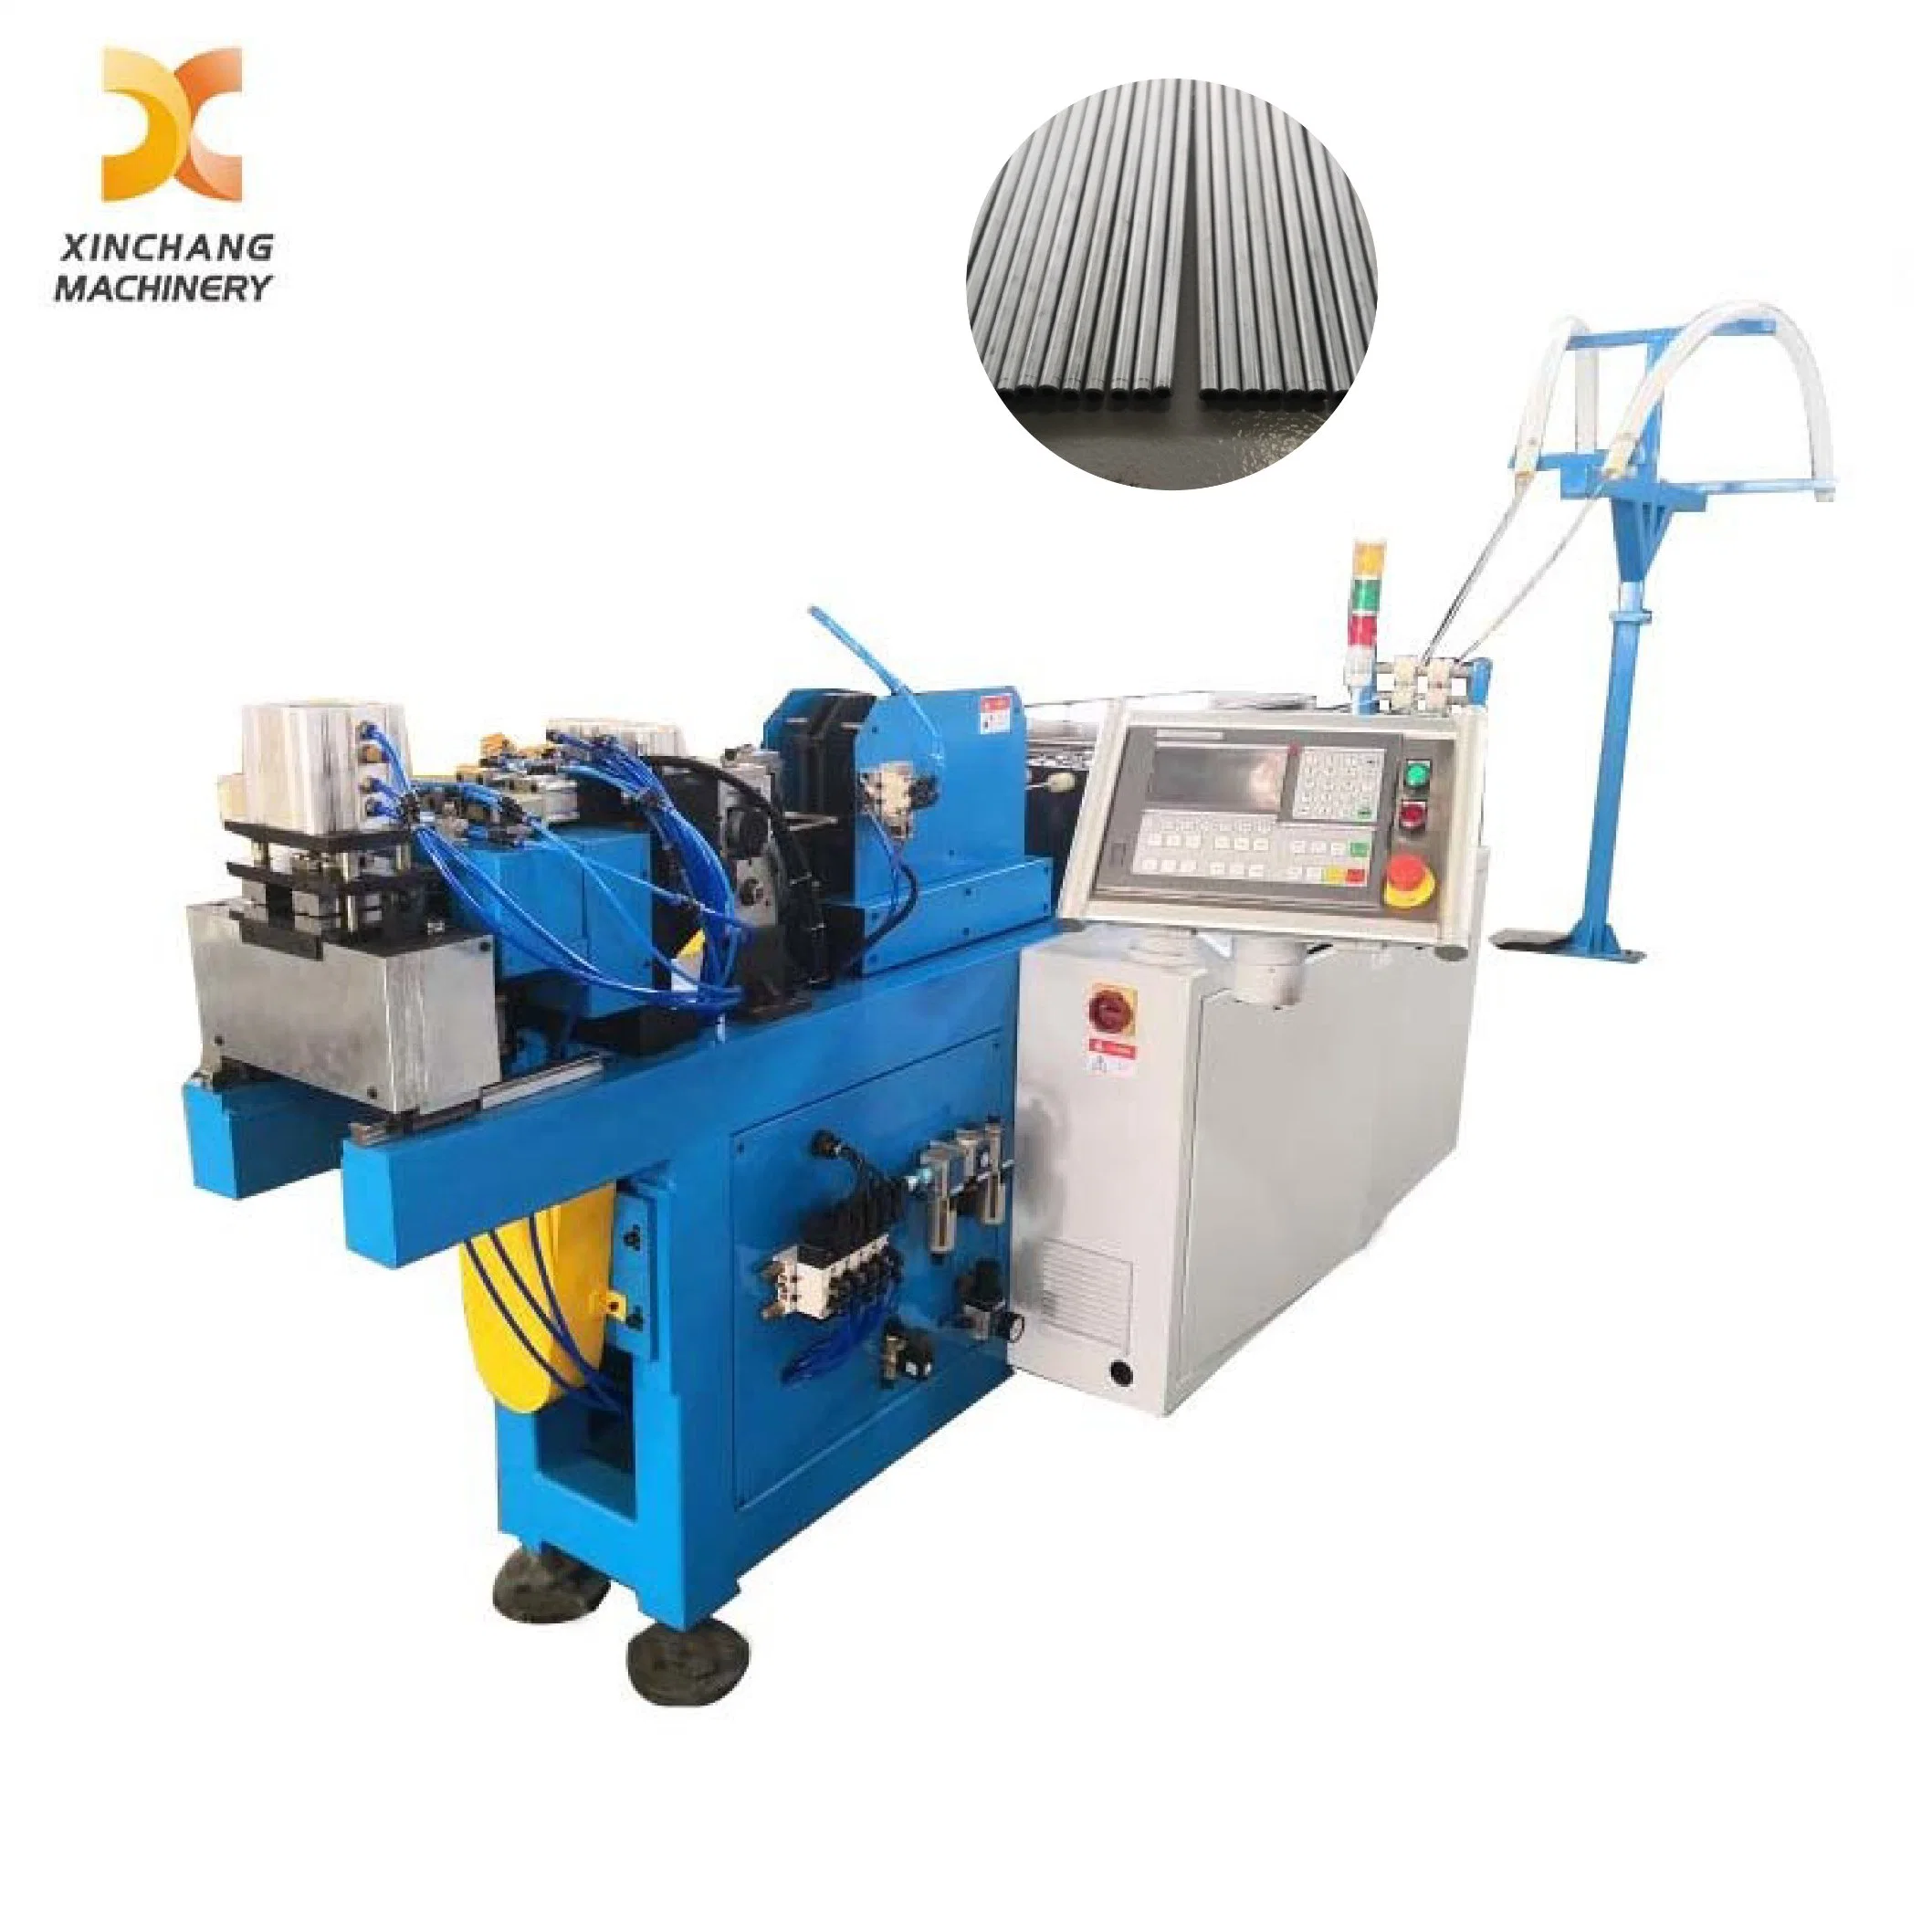 Customized 3 Phase 4 Wire Air Conditioning Pipe Tube Process Straightening and Cutting Equipment